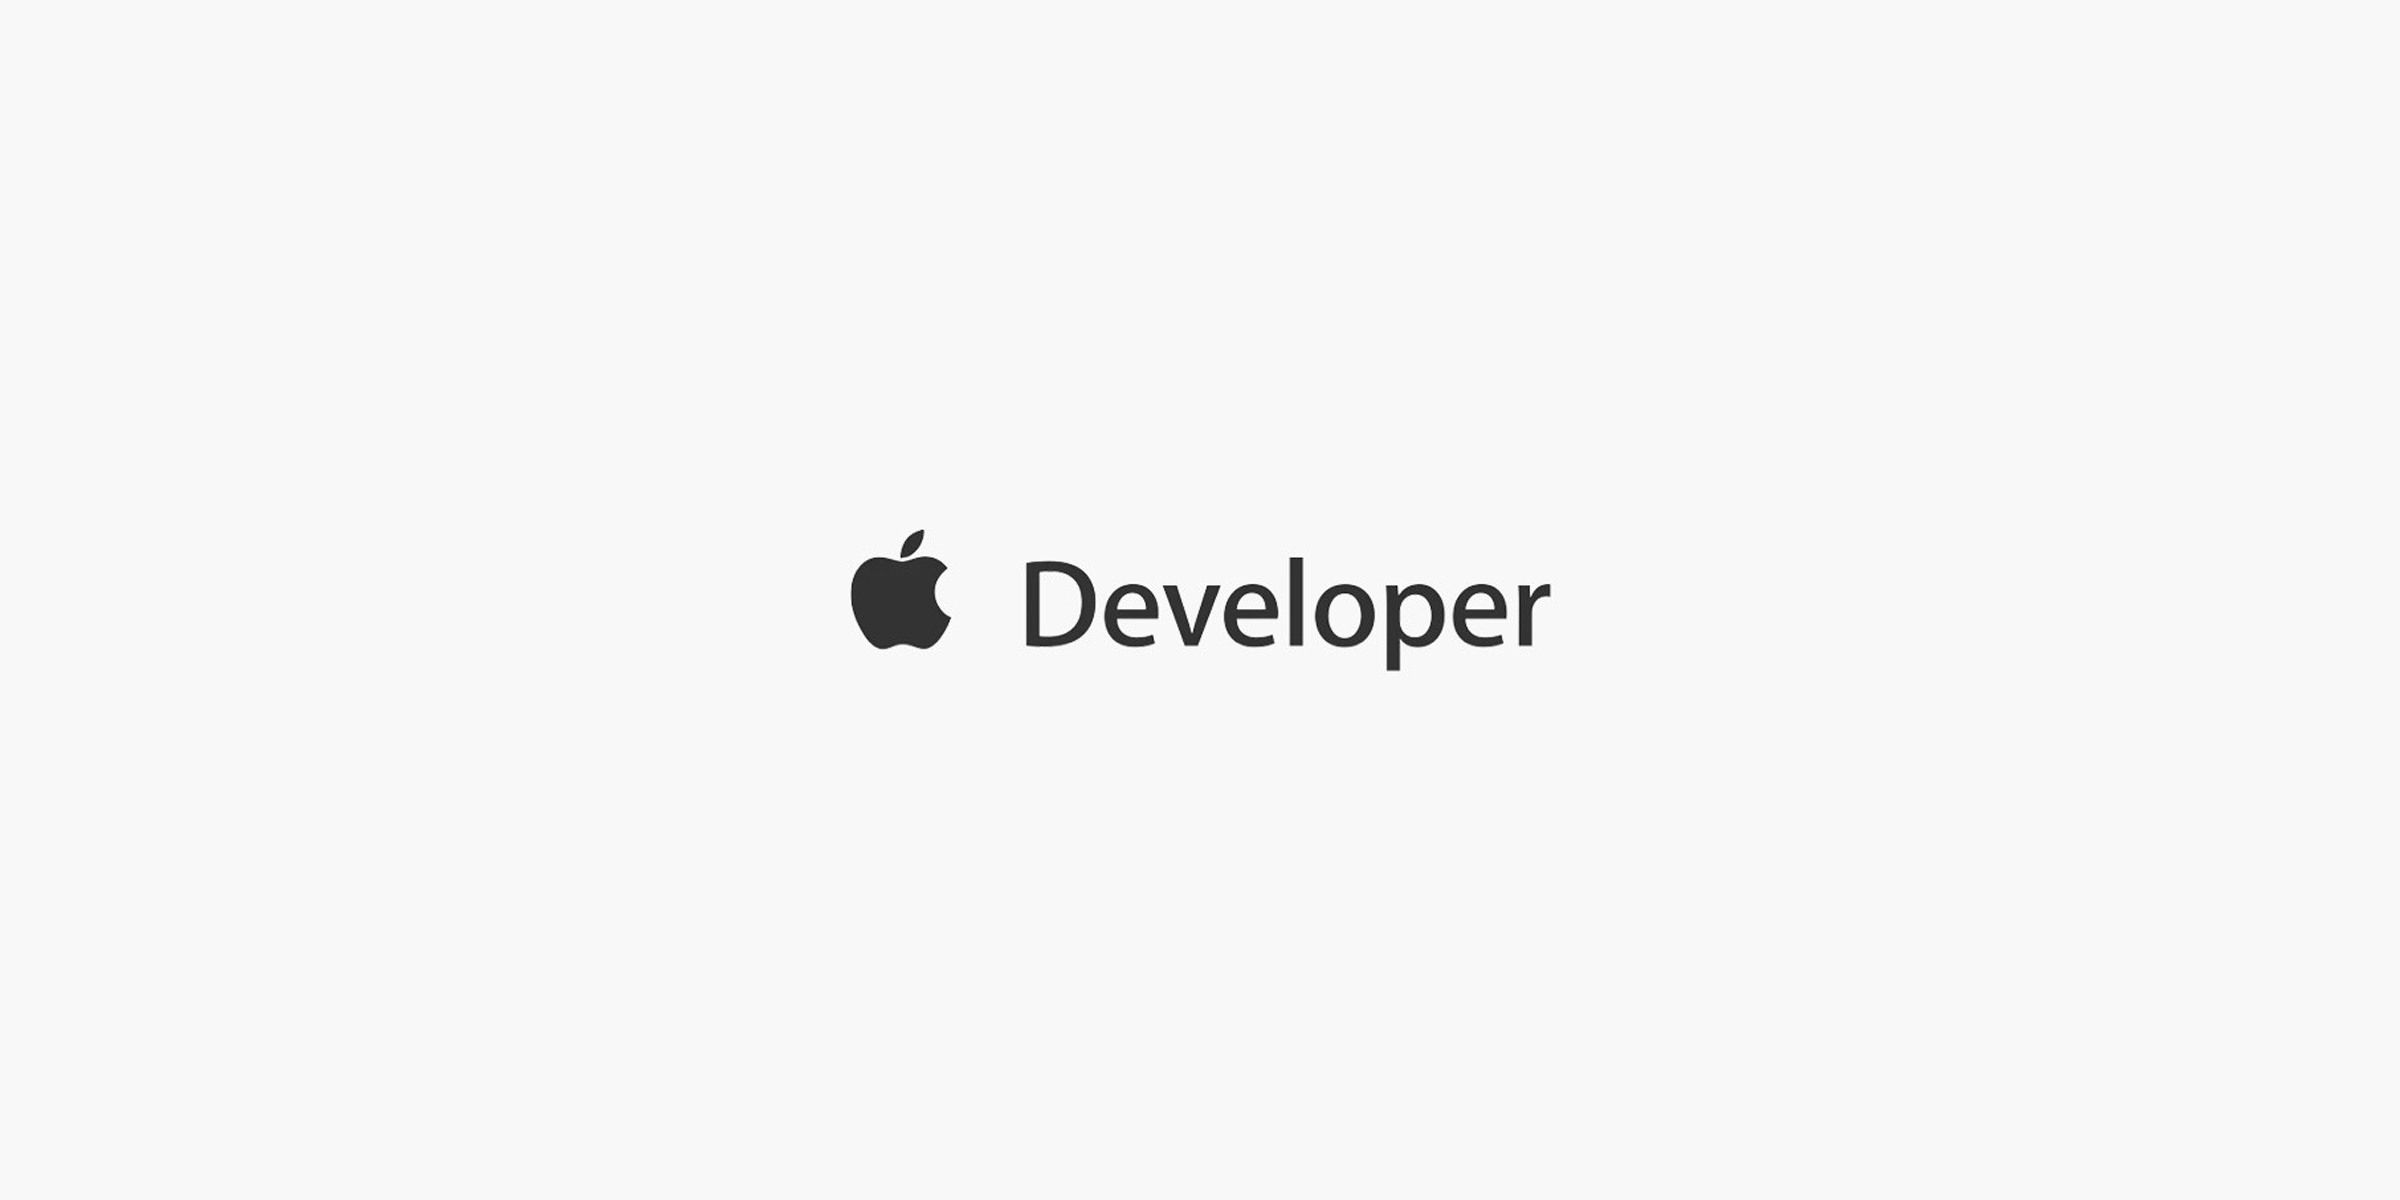 Calling Apple Developers: Use Clerk to Share MFA Login Codes